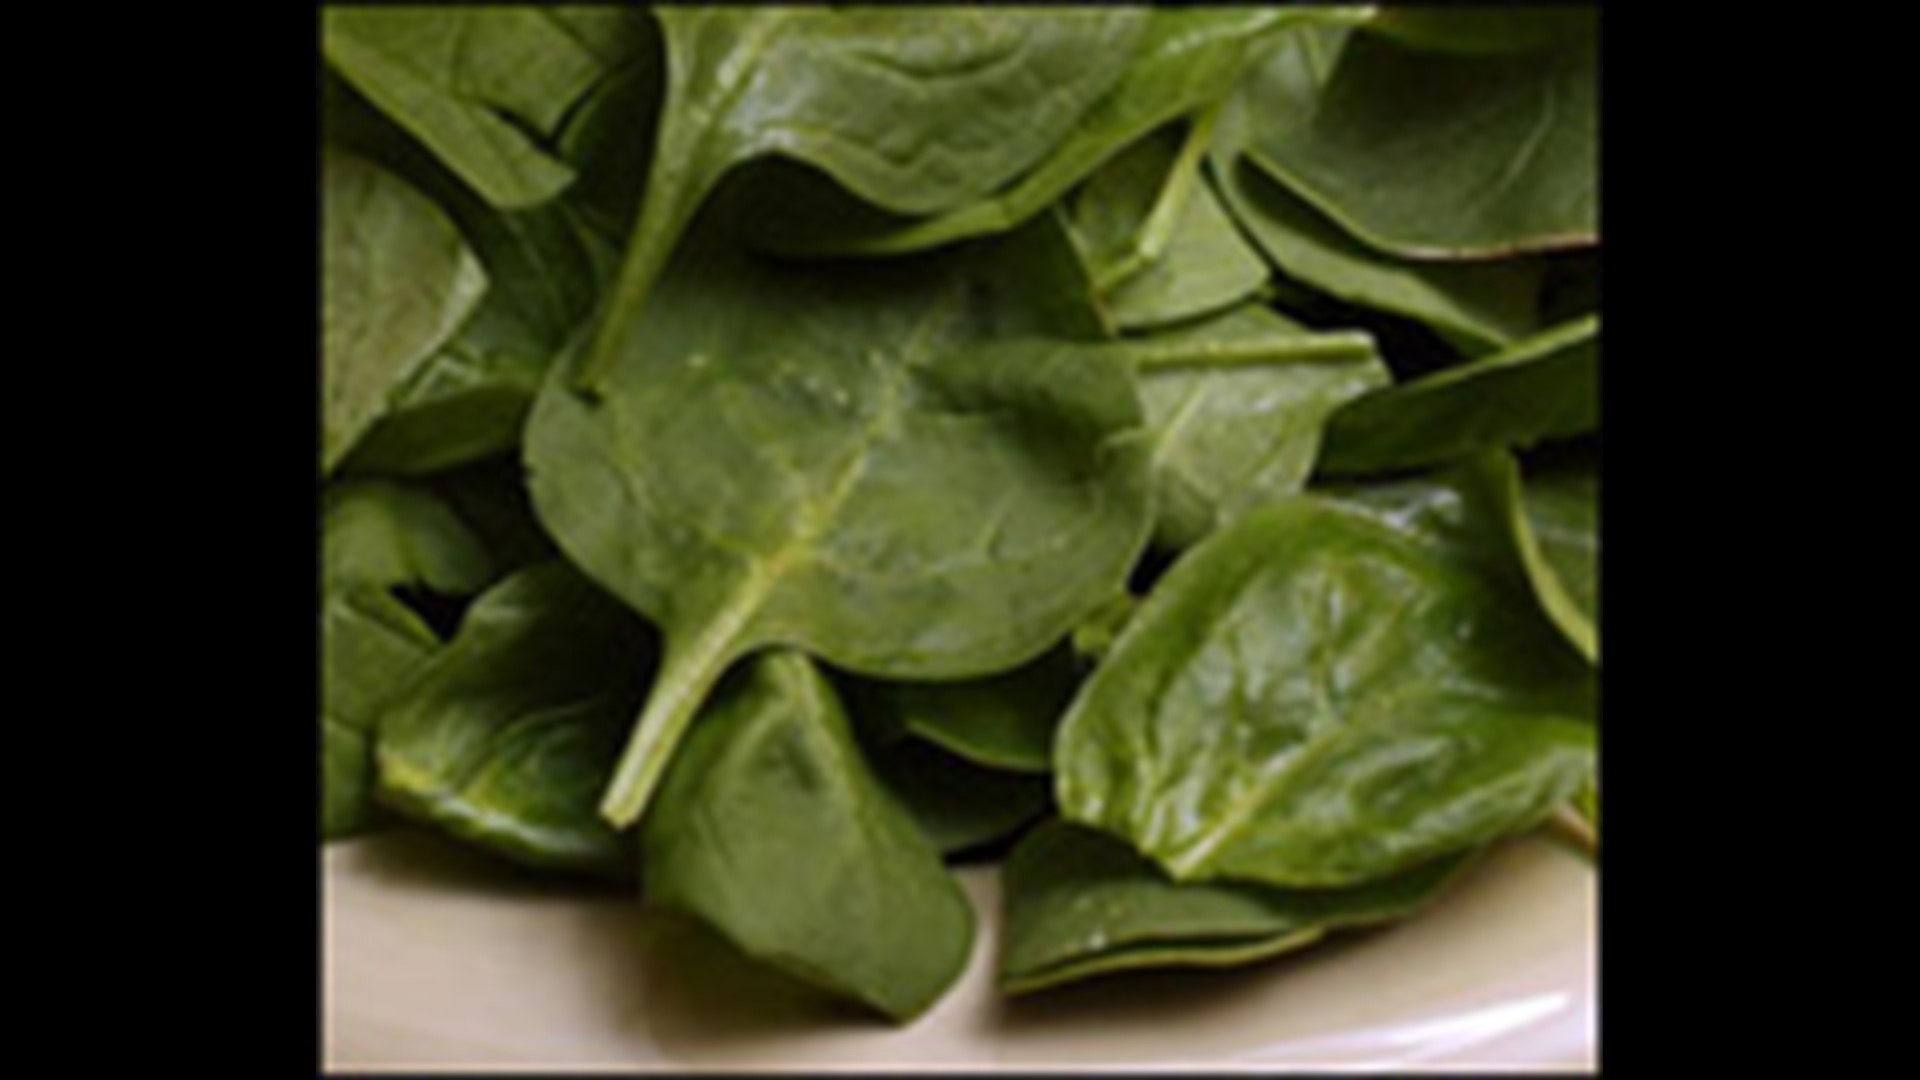 Spinach recall sparks oversight calls